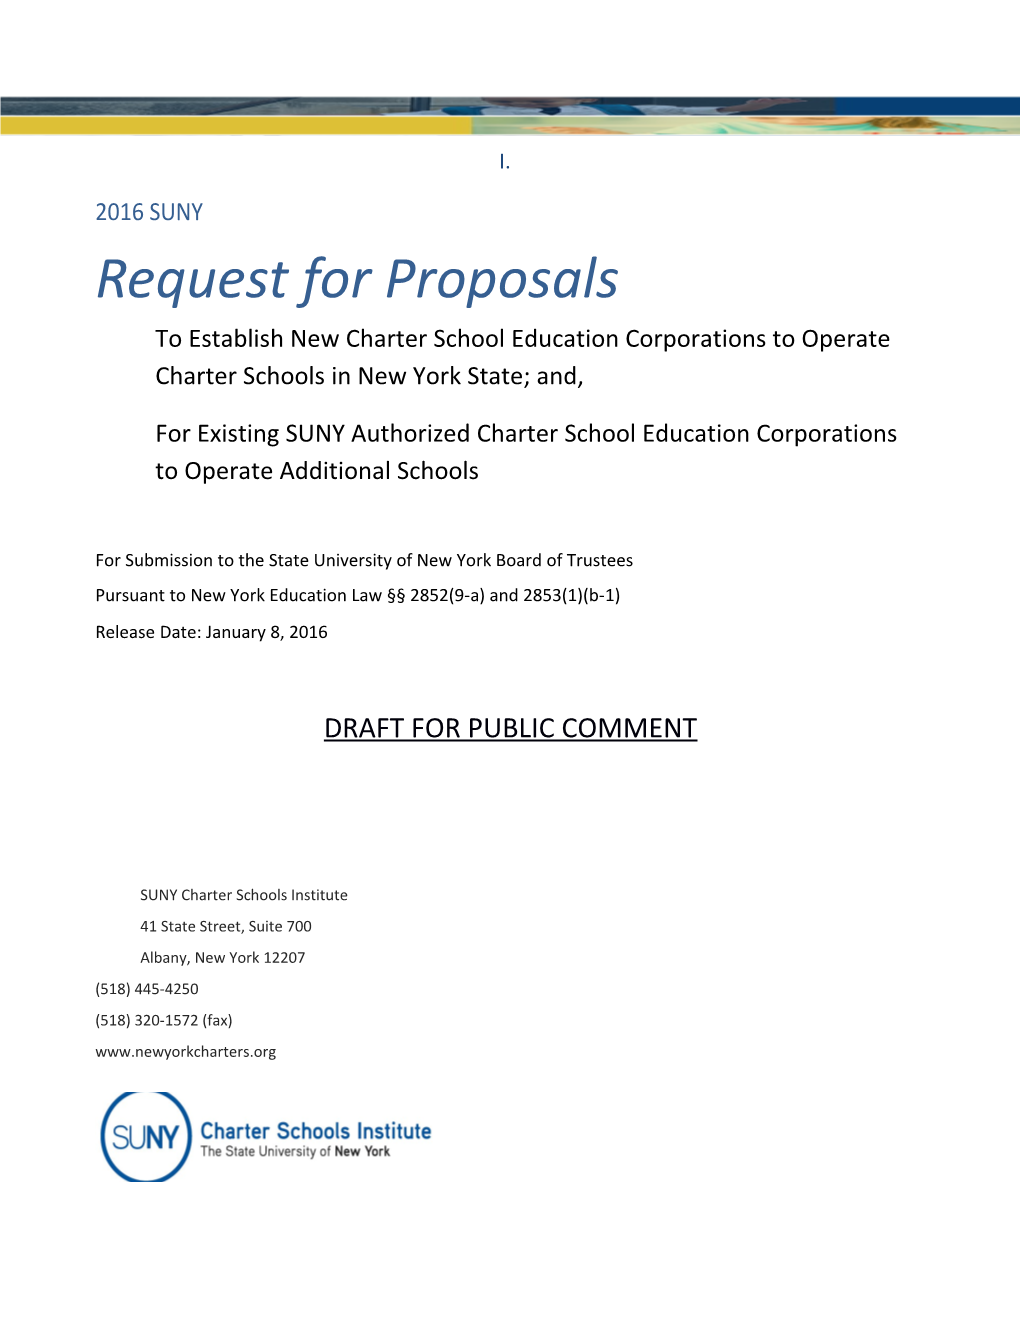 For Existing SUNY Authorized Charter School Education Corporations to Operate Additional Schools